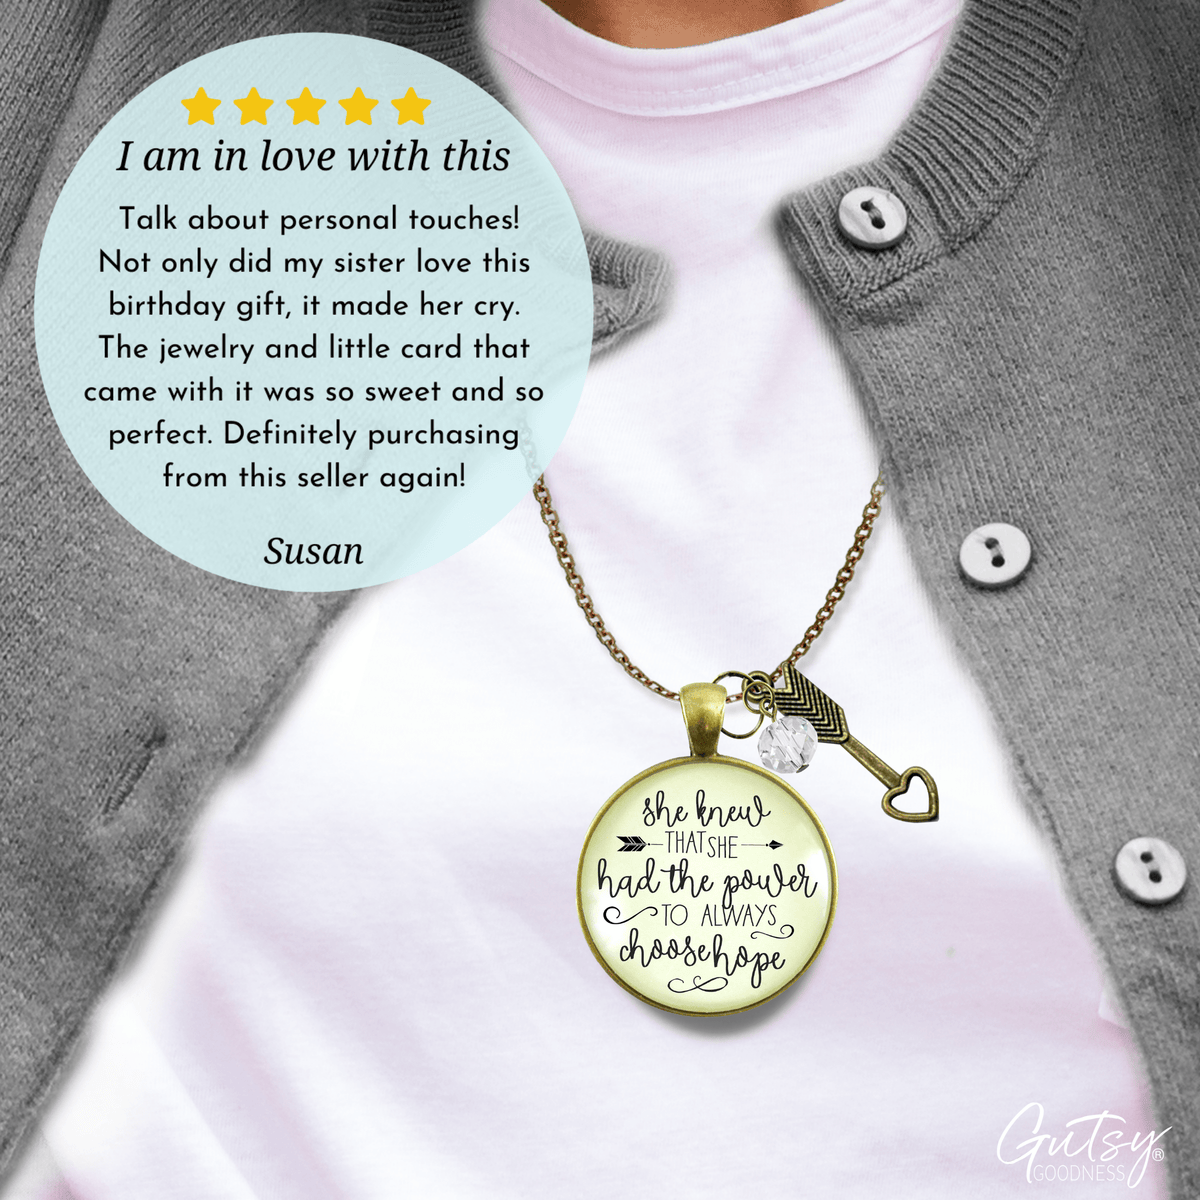 Gutsy Goodness She Knew She Had Power to Choose Hope Necklace Inspirational Jewelry - Gutsy Goodness Handmade Jewelry;She Knew She Had Power To Choose Hope Necklace Inspirational Jewelry - Gutsy Goodness Handmade Jewelry Gifts